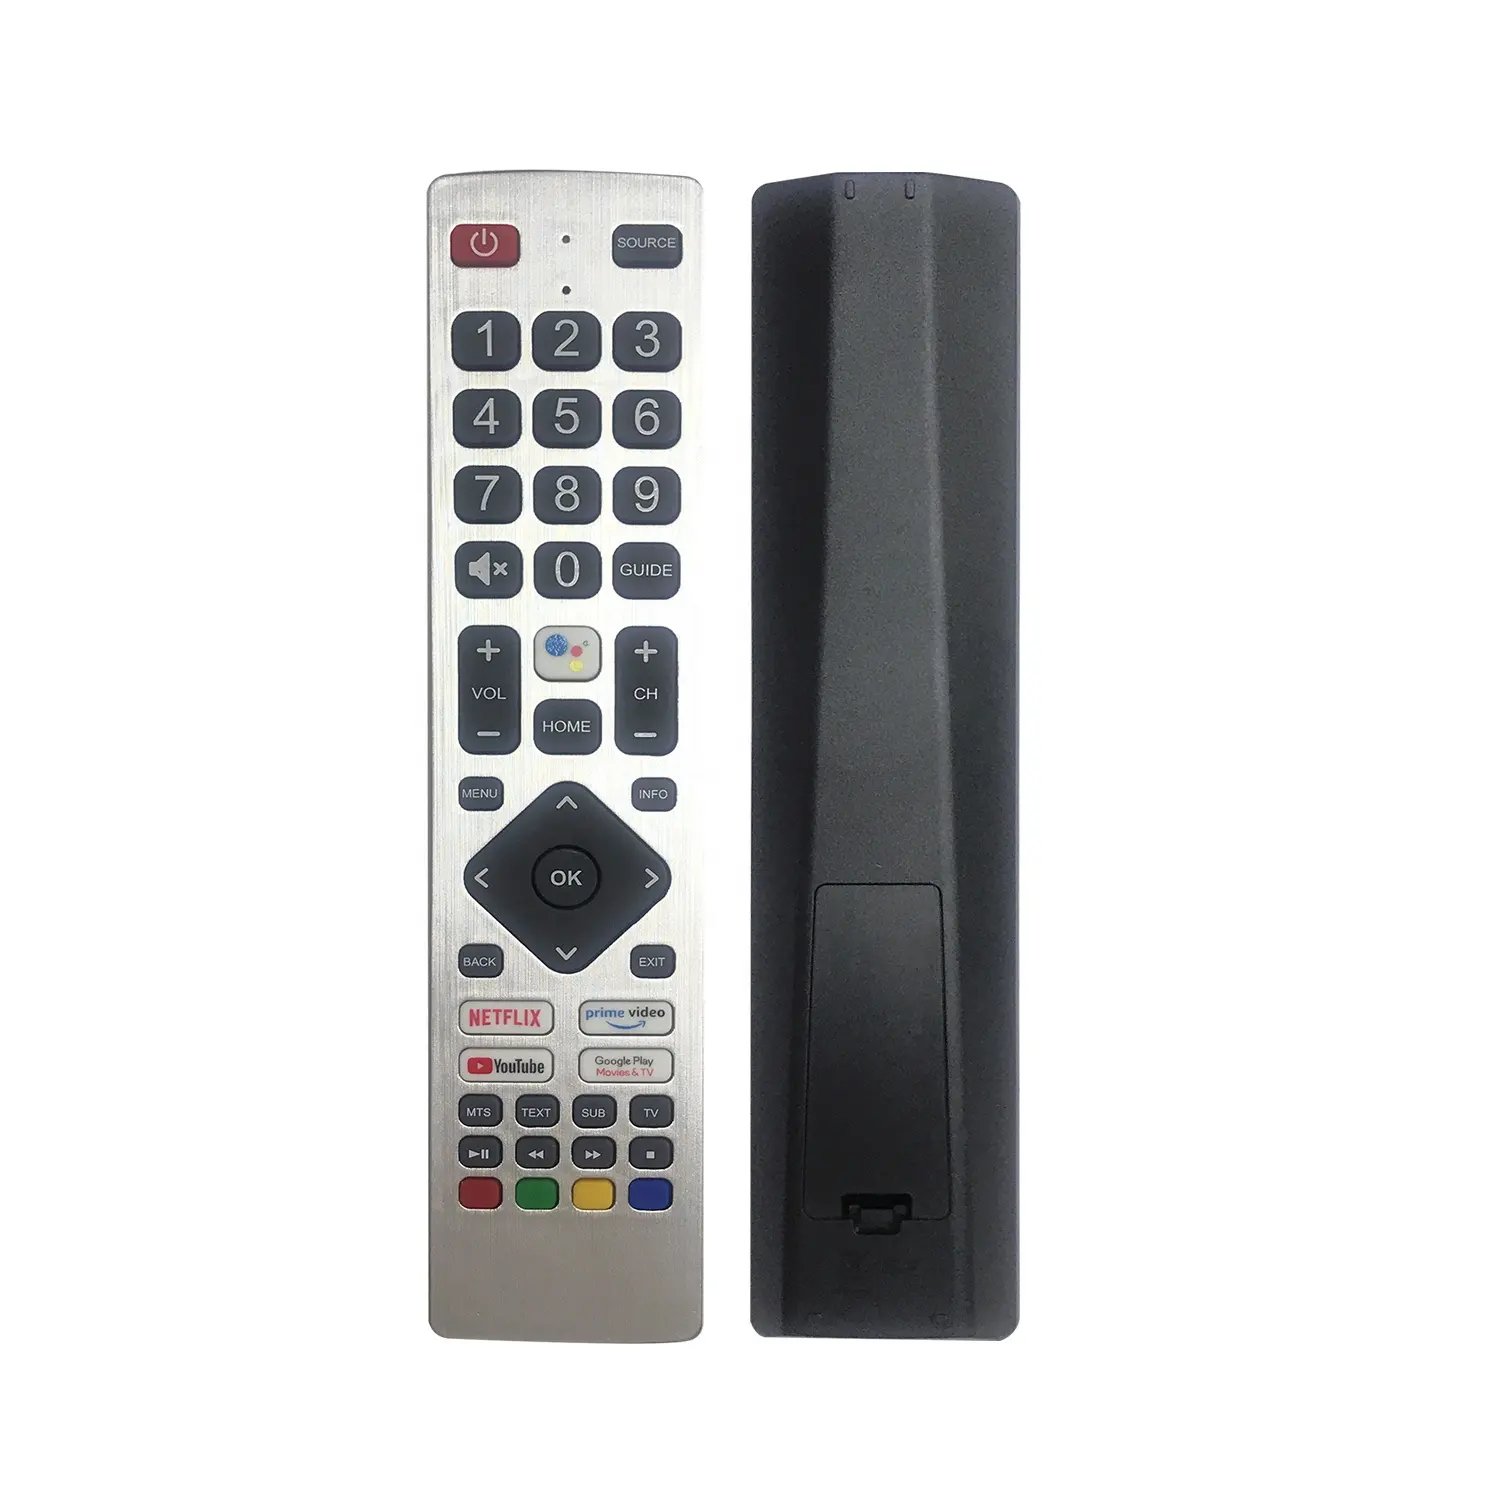 SPV01 voice Remote Control For Sharp Aquos TV SHWRMC0133 LC-40BL2EA LC-40BL3EA with Netflix Youtube Google Play